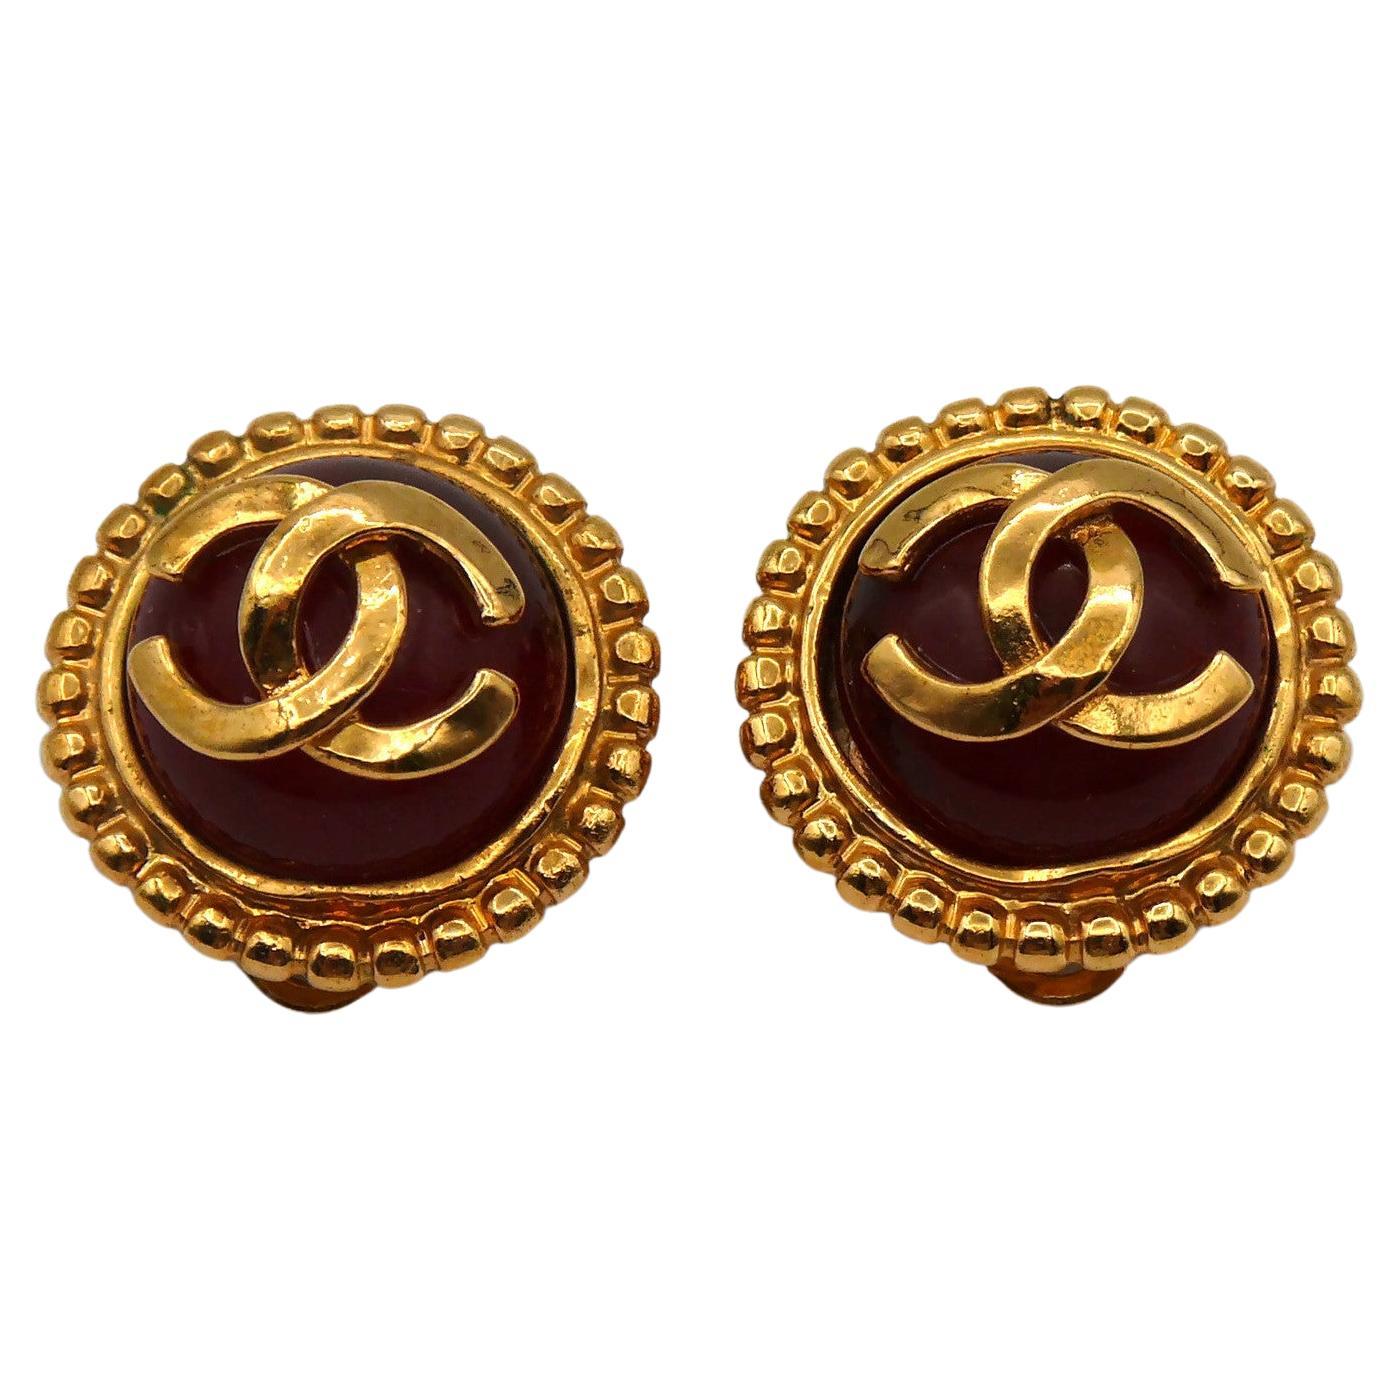 CHANEL by KARL LAGERFELD Vintage Gripoix CC Clip-On Earrings, 1997 For Sale